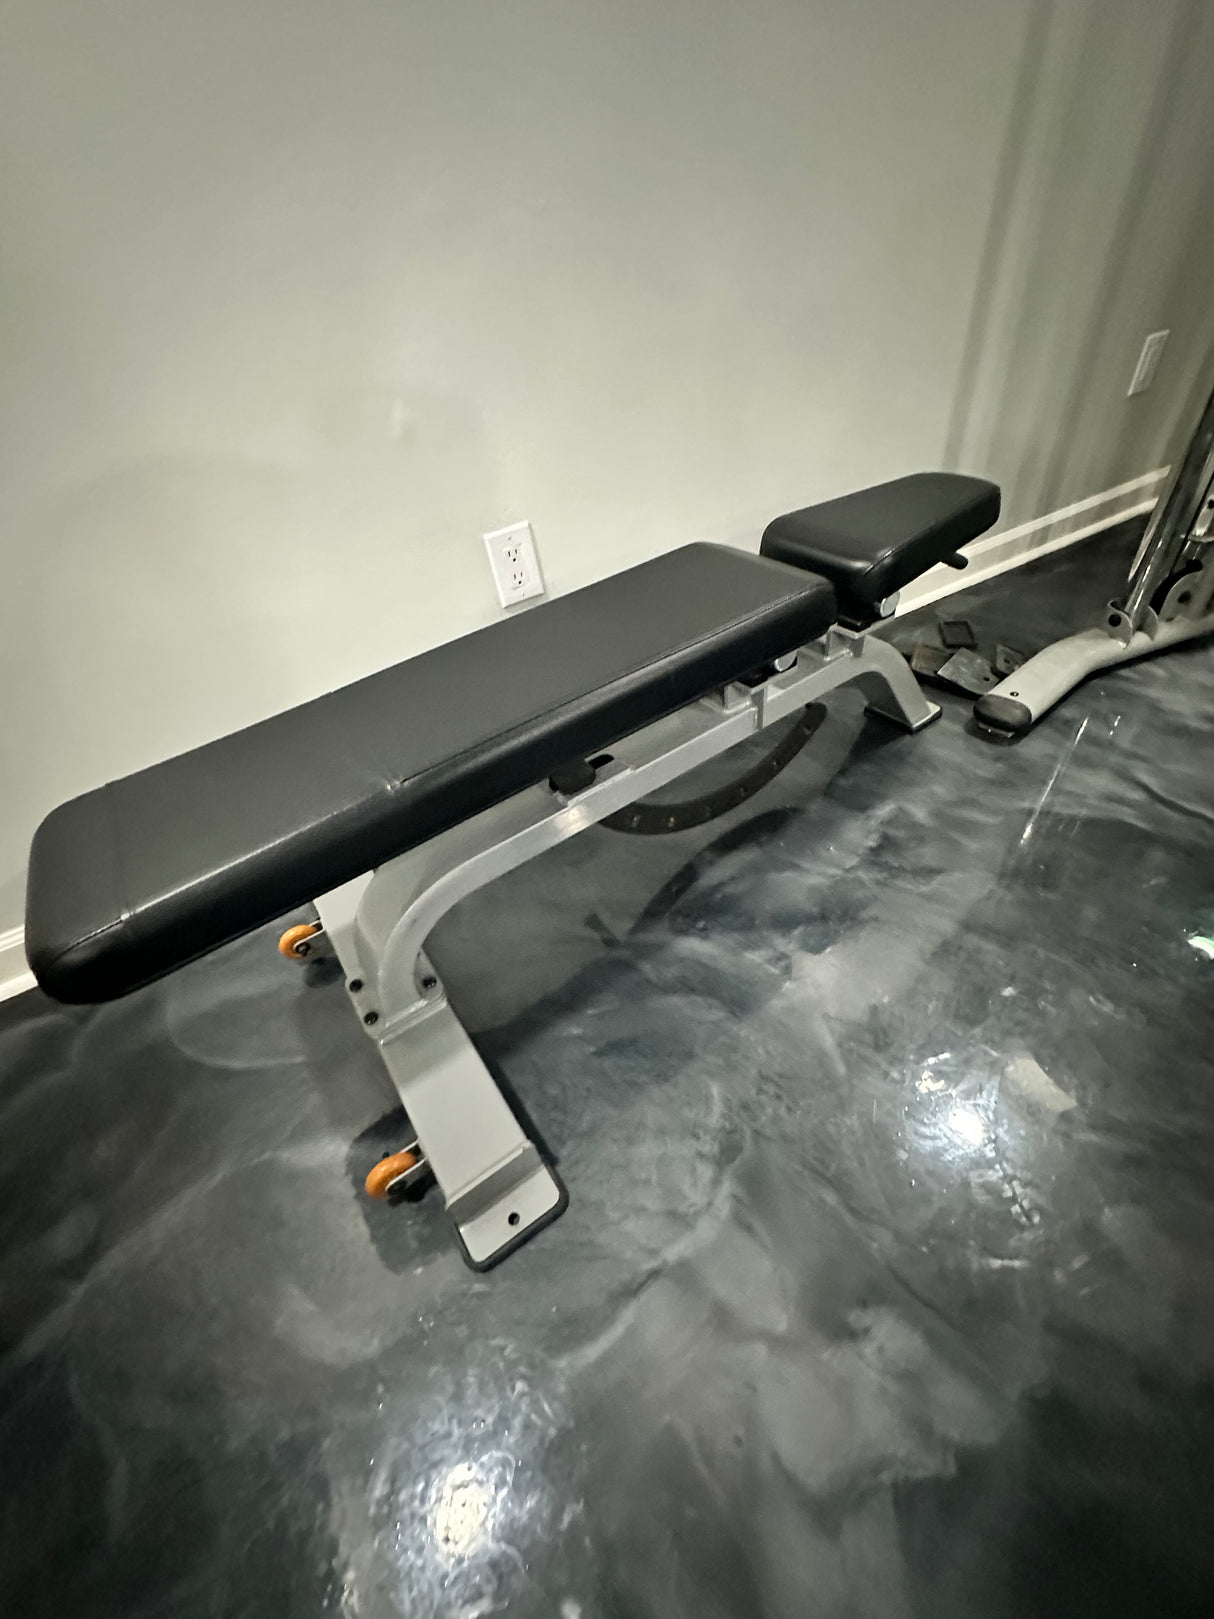 Precor Discovery Series Adjustable Bench - Like New Condition - ExerciseUnlimited